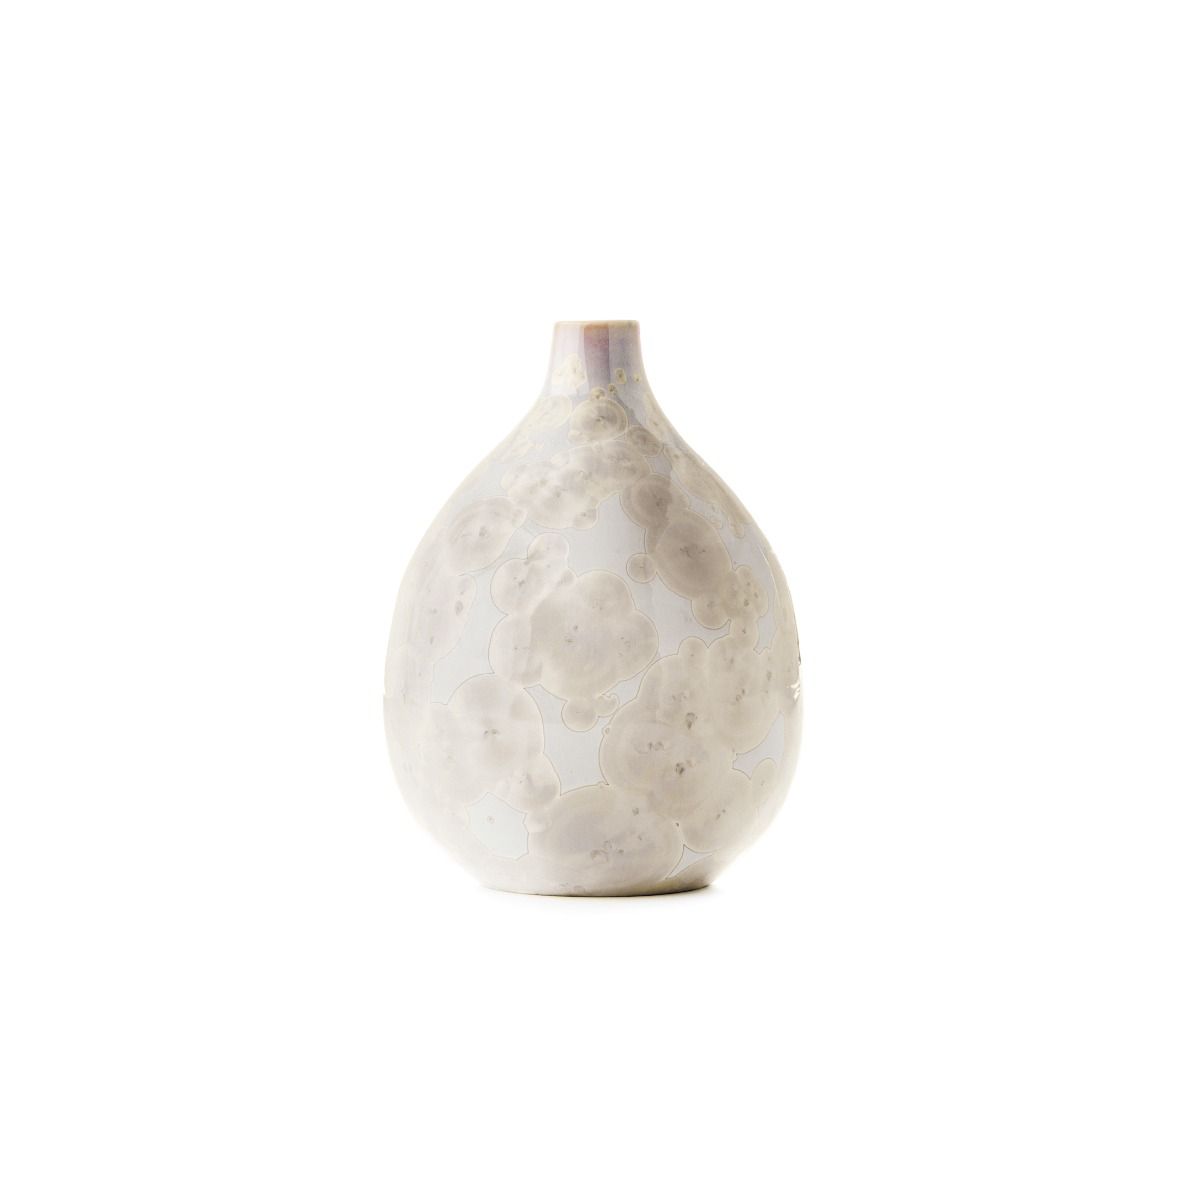 SIMON PEARCE VASE TEARDROP CRYSTALLINE - CANDENT (Available in 2 Sizes)